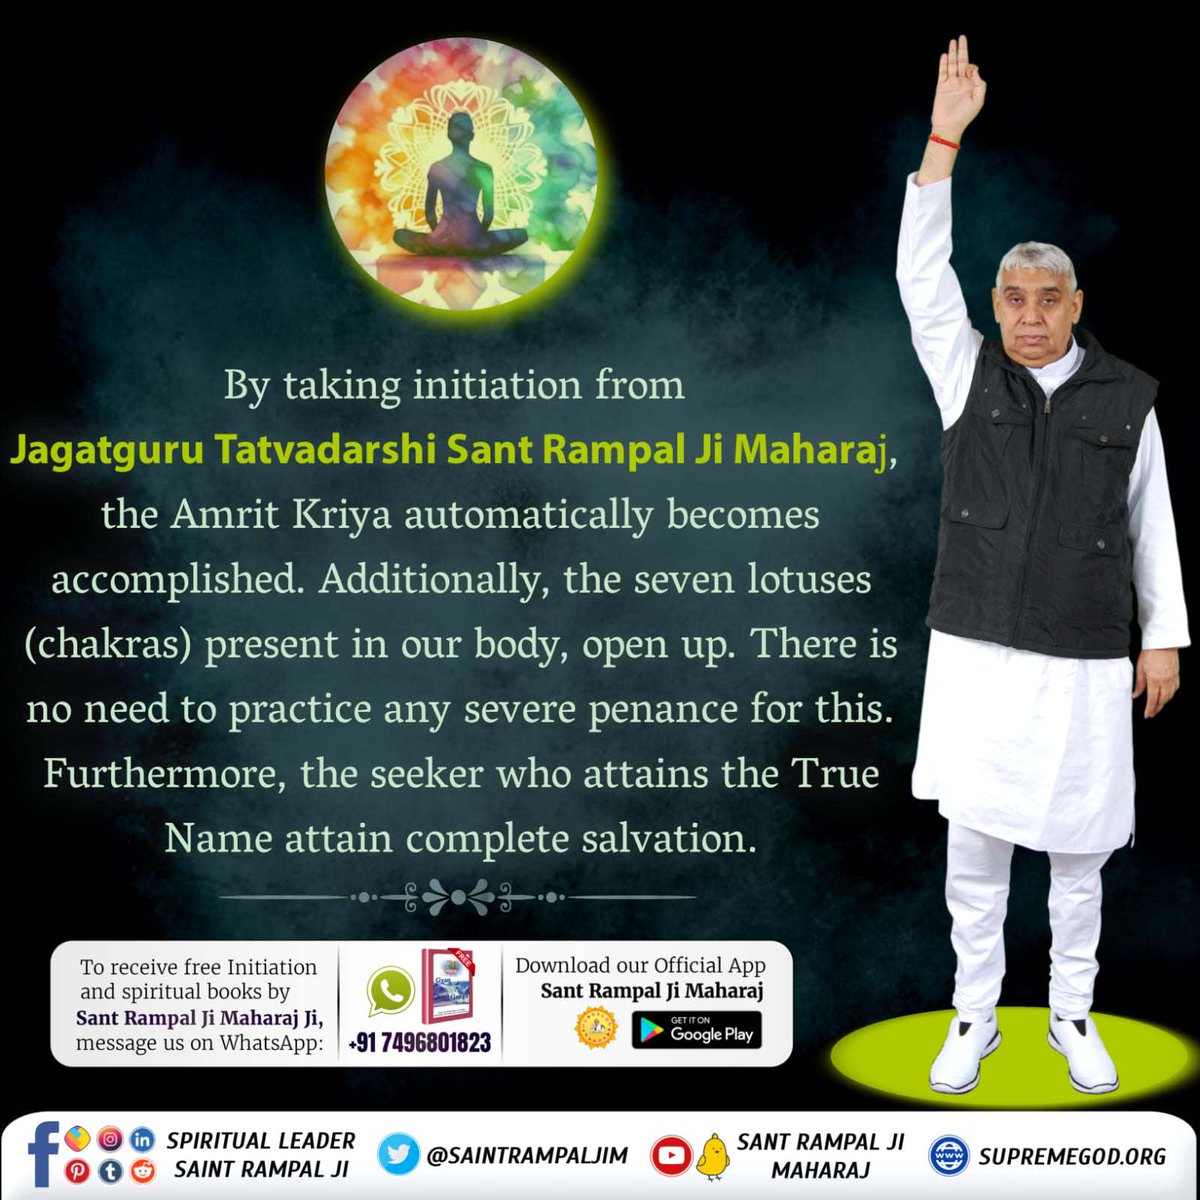 #What_Is_Meditation By taking initiation from Jagatguru Tatvadarshi Sant Rampal Ji Maharaj, the Amrit Kriya automatically becomes accomplished. Additionally, the seven lotuses (chakras) present in our body, open up. There is no need to practice any severe penance for this. (१/२),